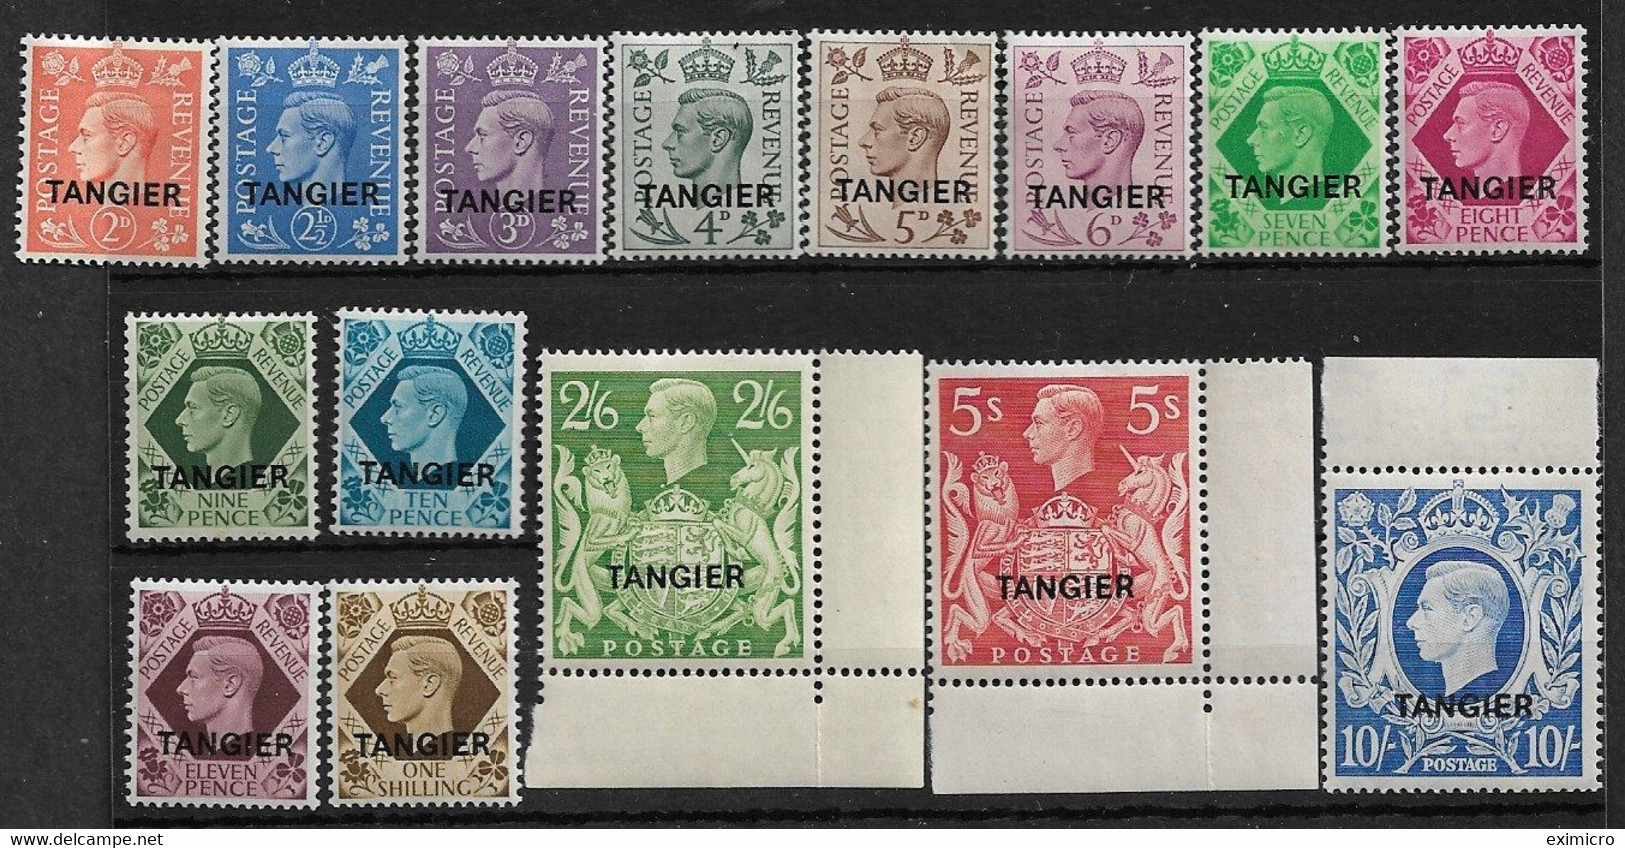 MOROCCO AGENCIES (TANGIER) 1949 SET SG 261/275 UNMOUNTED MINT Cat £120 - Morocco Agencies / Tangier (...-1958)